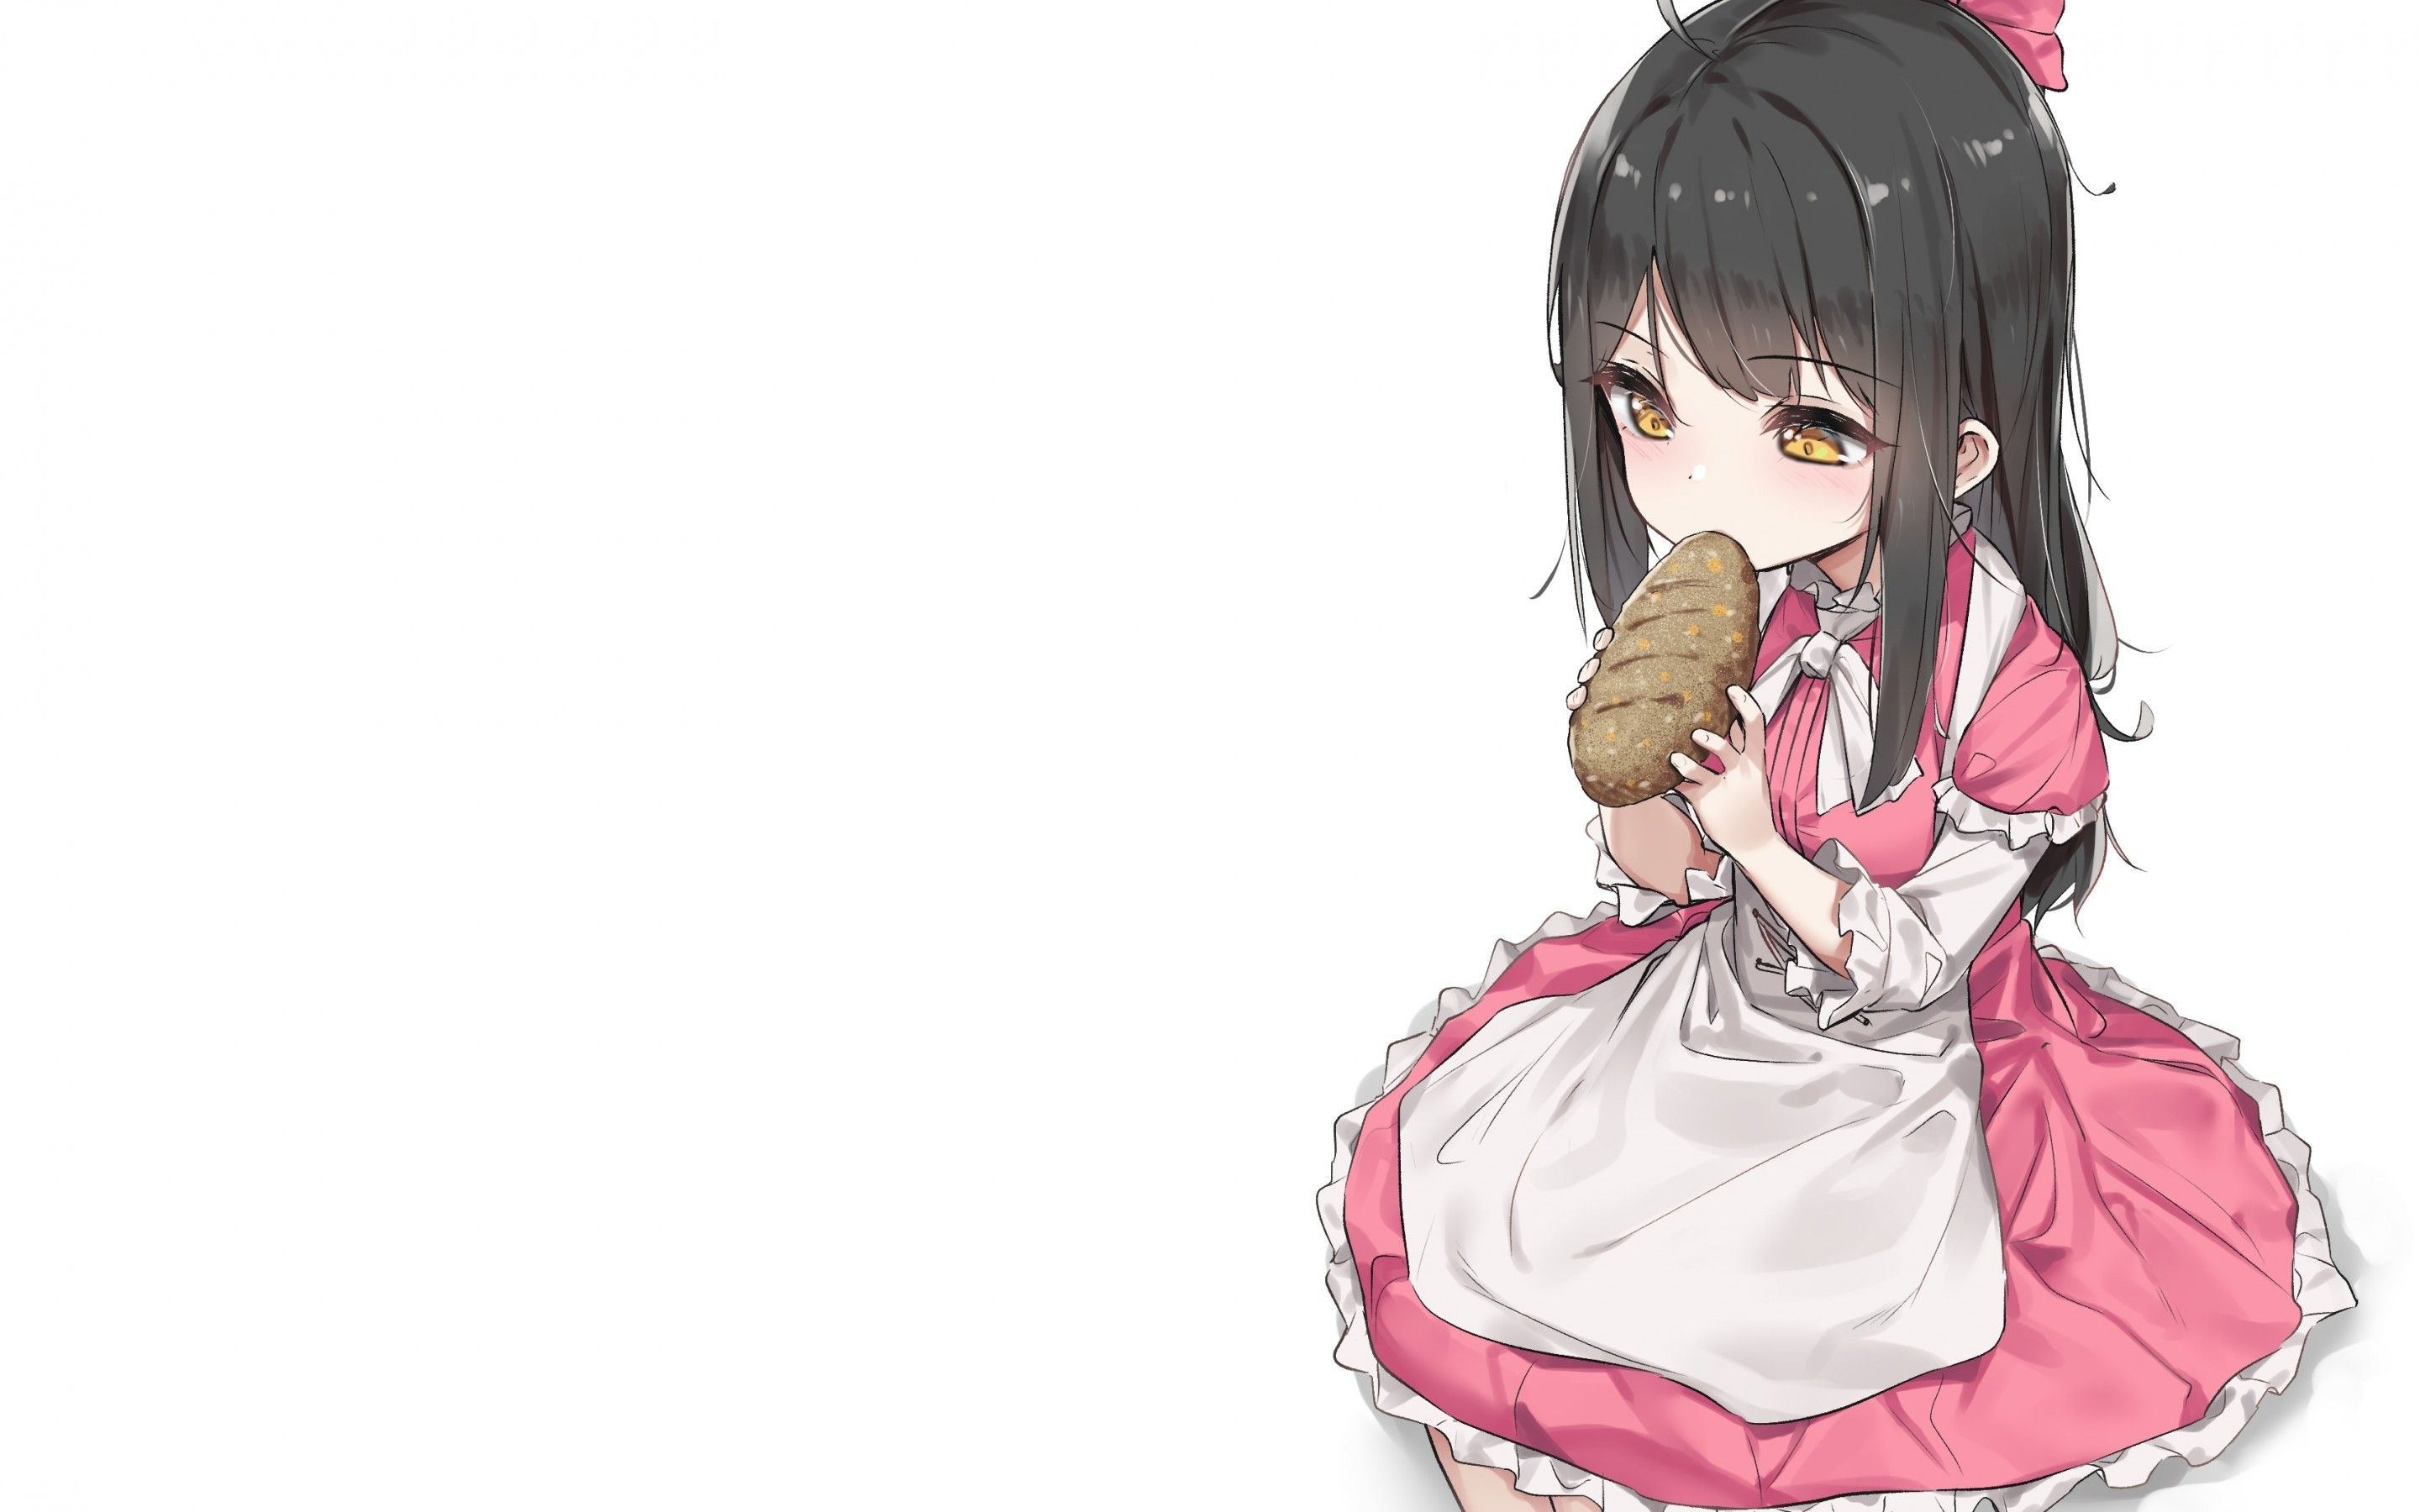 Download 2880x1800 Anime Girl, Cute, Eating A Bread, Loli, Apron, Black Hair Wallpaper for MacBook Pro 15 inch